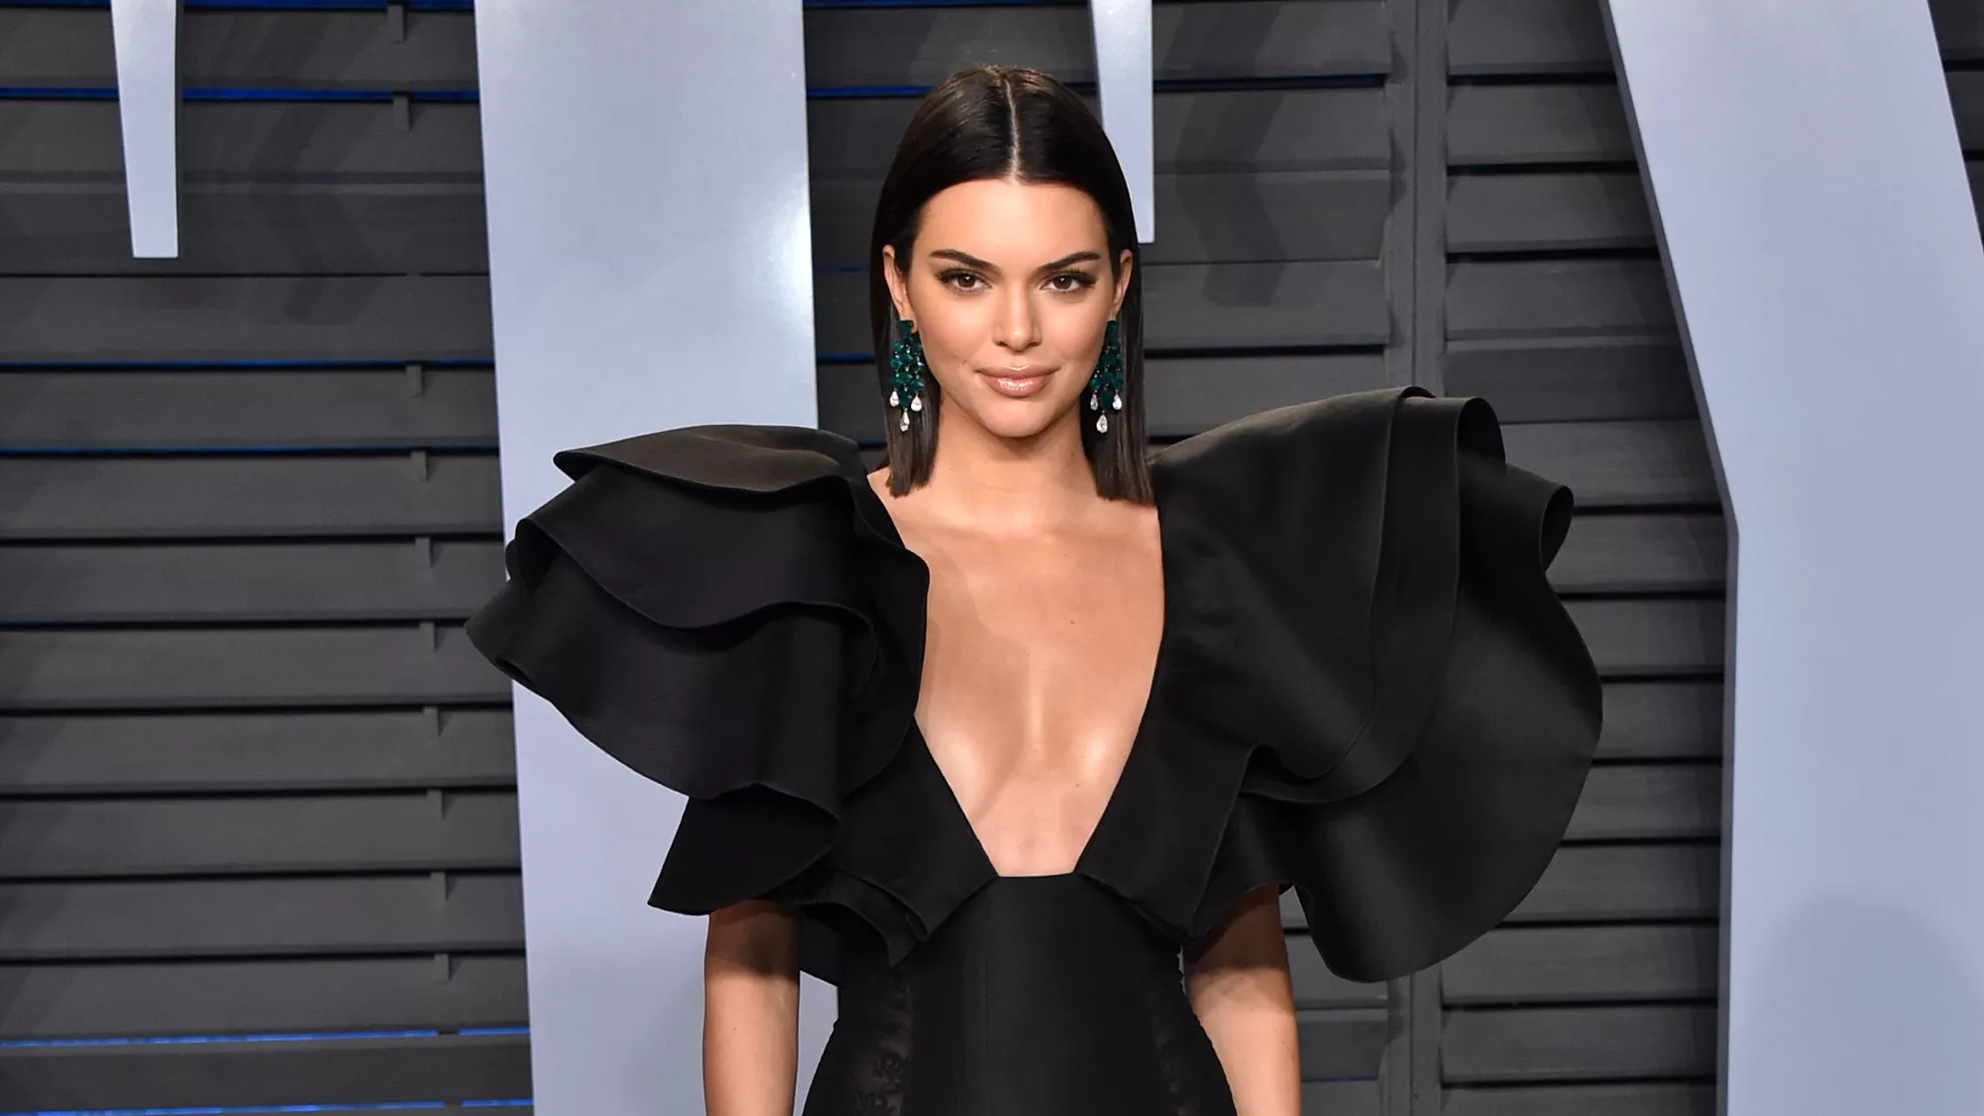 Kendall Jenner’s Underwear Bunny Rabbit Snap Sparks Confusion: ‘Is That A Chicken?’